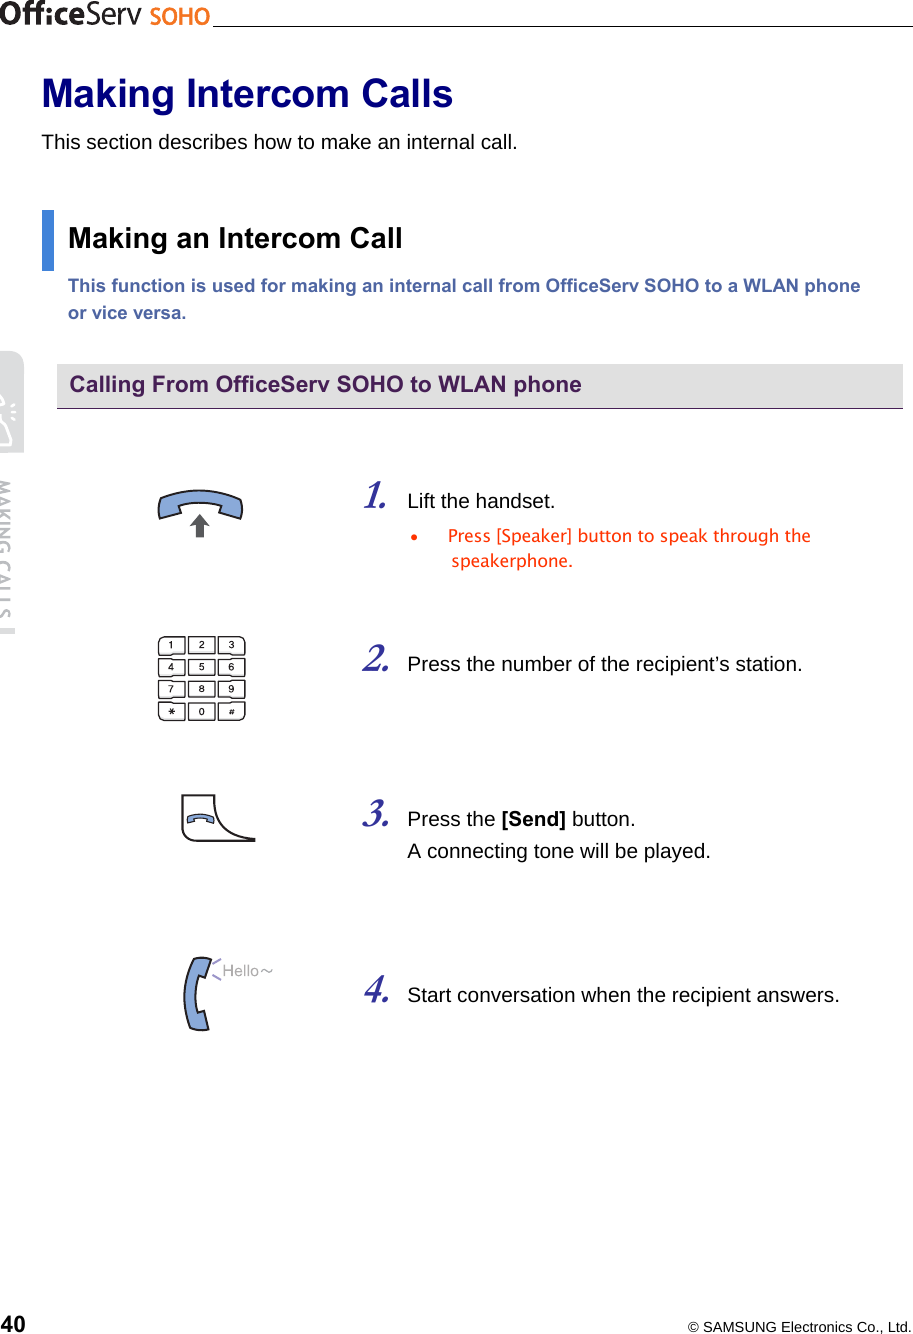    40  © SAMSUNG Electronics Co., Ltd. Making Intercom Calls This section describes how to make an internal call.  Making an Intercom Call This function is used for making an internal call from OfficeServ SOHO to a WLAN phone or vice versa.  Calling From OfficeServ SOHO to WLAN phone   1. Lift the handset. •  Press [Speaker] button to speak through the speakerphone.   2. Press the number of the recipient’s station.      3. Press the [Send] button.   A connecting tone will be played.    4. Start conversation when the recipient answers.  